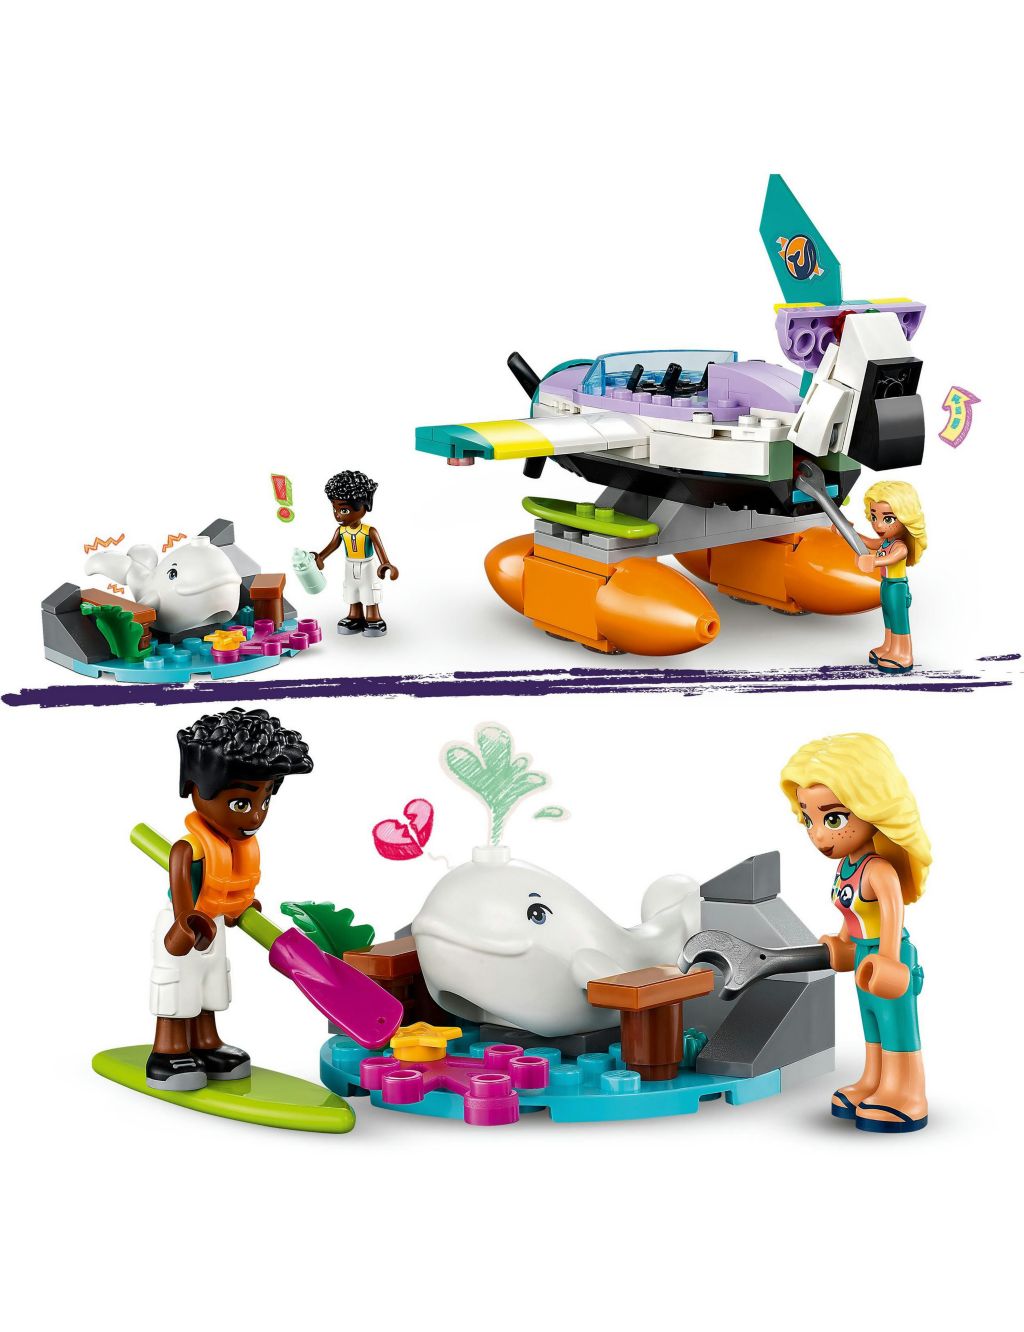 LEGO Friends Sea Rescue Plane Toy Playset 41752 (6+ Yrs) 4 of 6